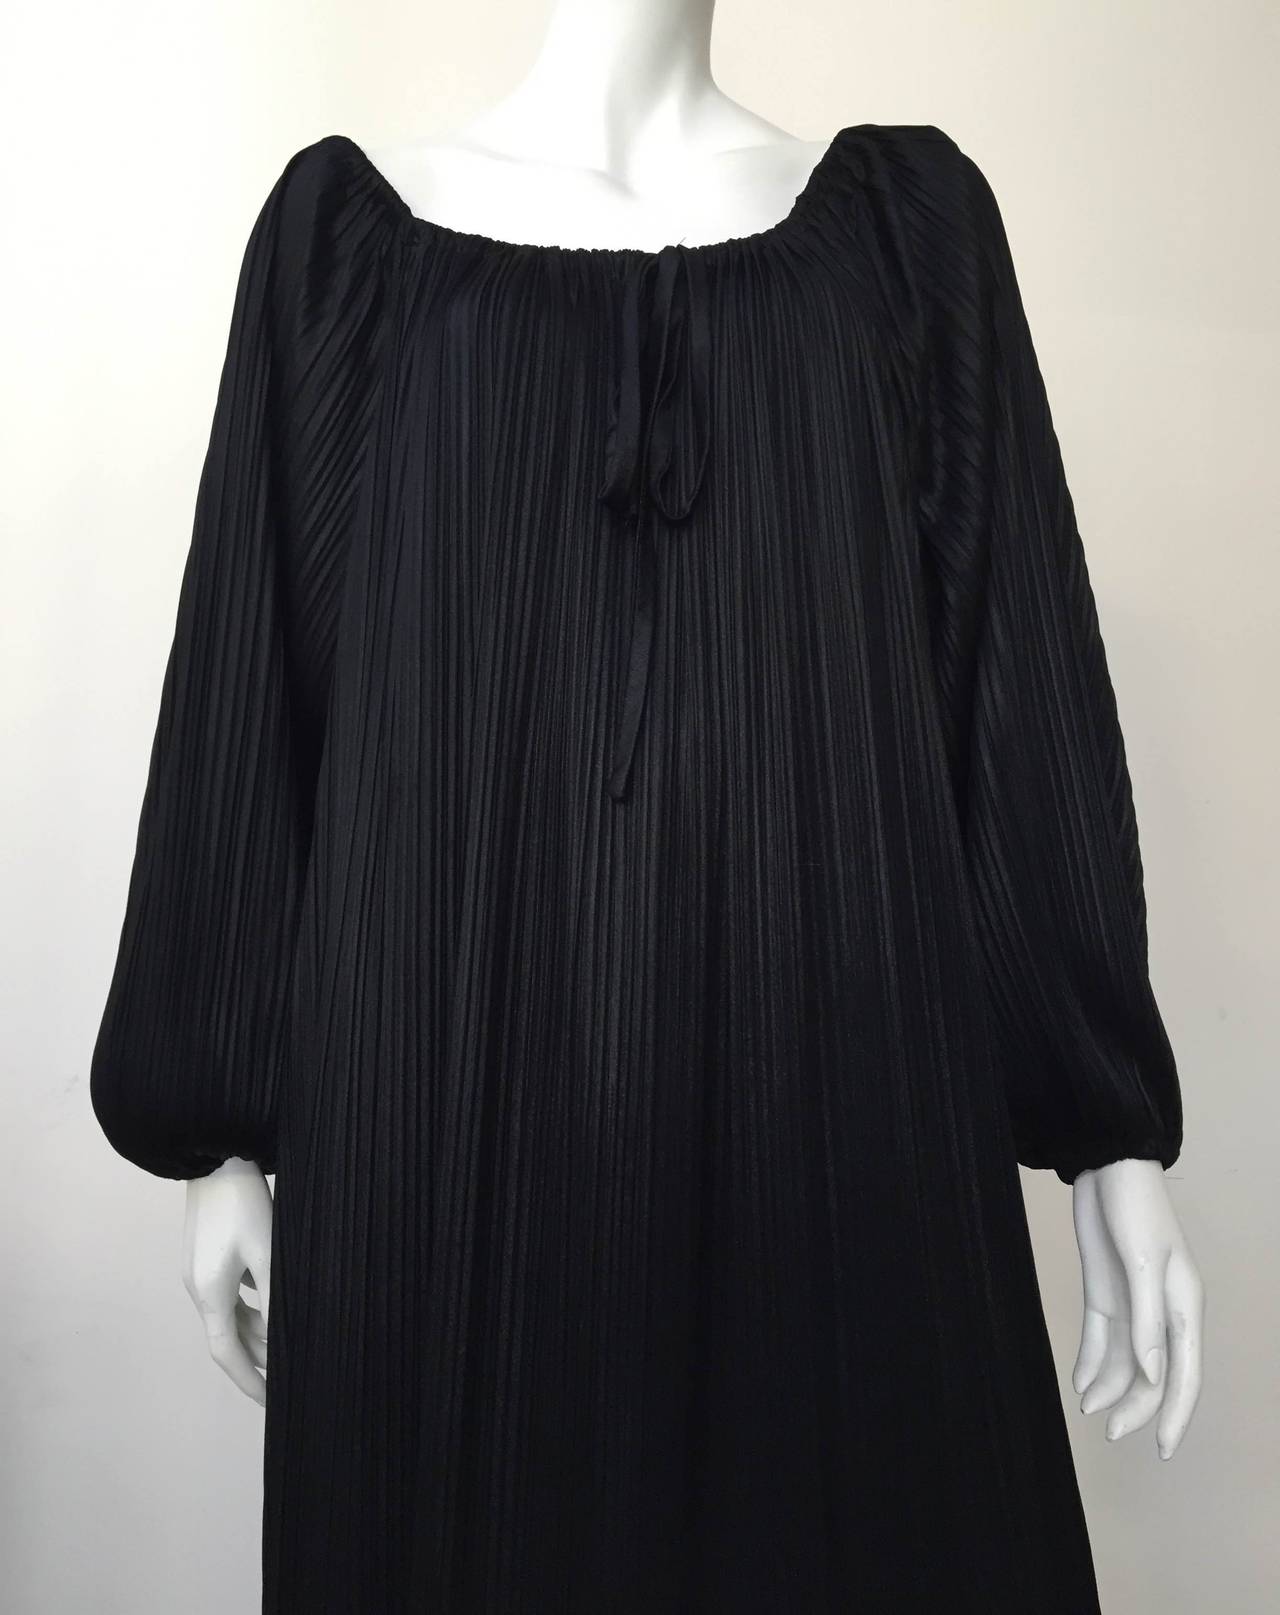 Halston IV Dorian 70s black caftan / loungewear for Sak's Fifth Avenue, made in the USA. There is an adjustable drawstring at neckline & elastic sleeves. The original size tag says it is a small but will easily fit any woman who wears a size 4, 6, 8